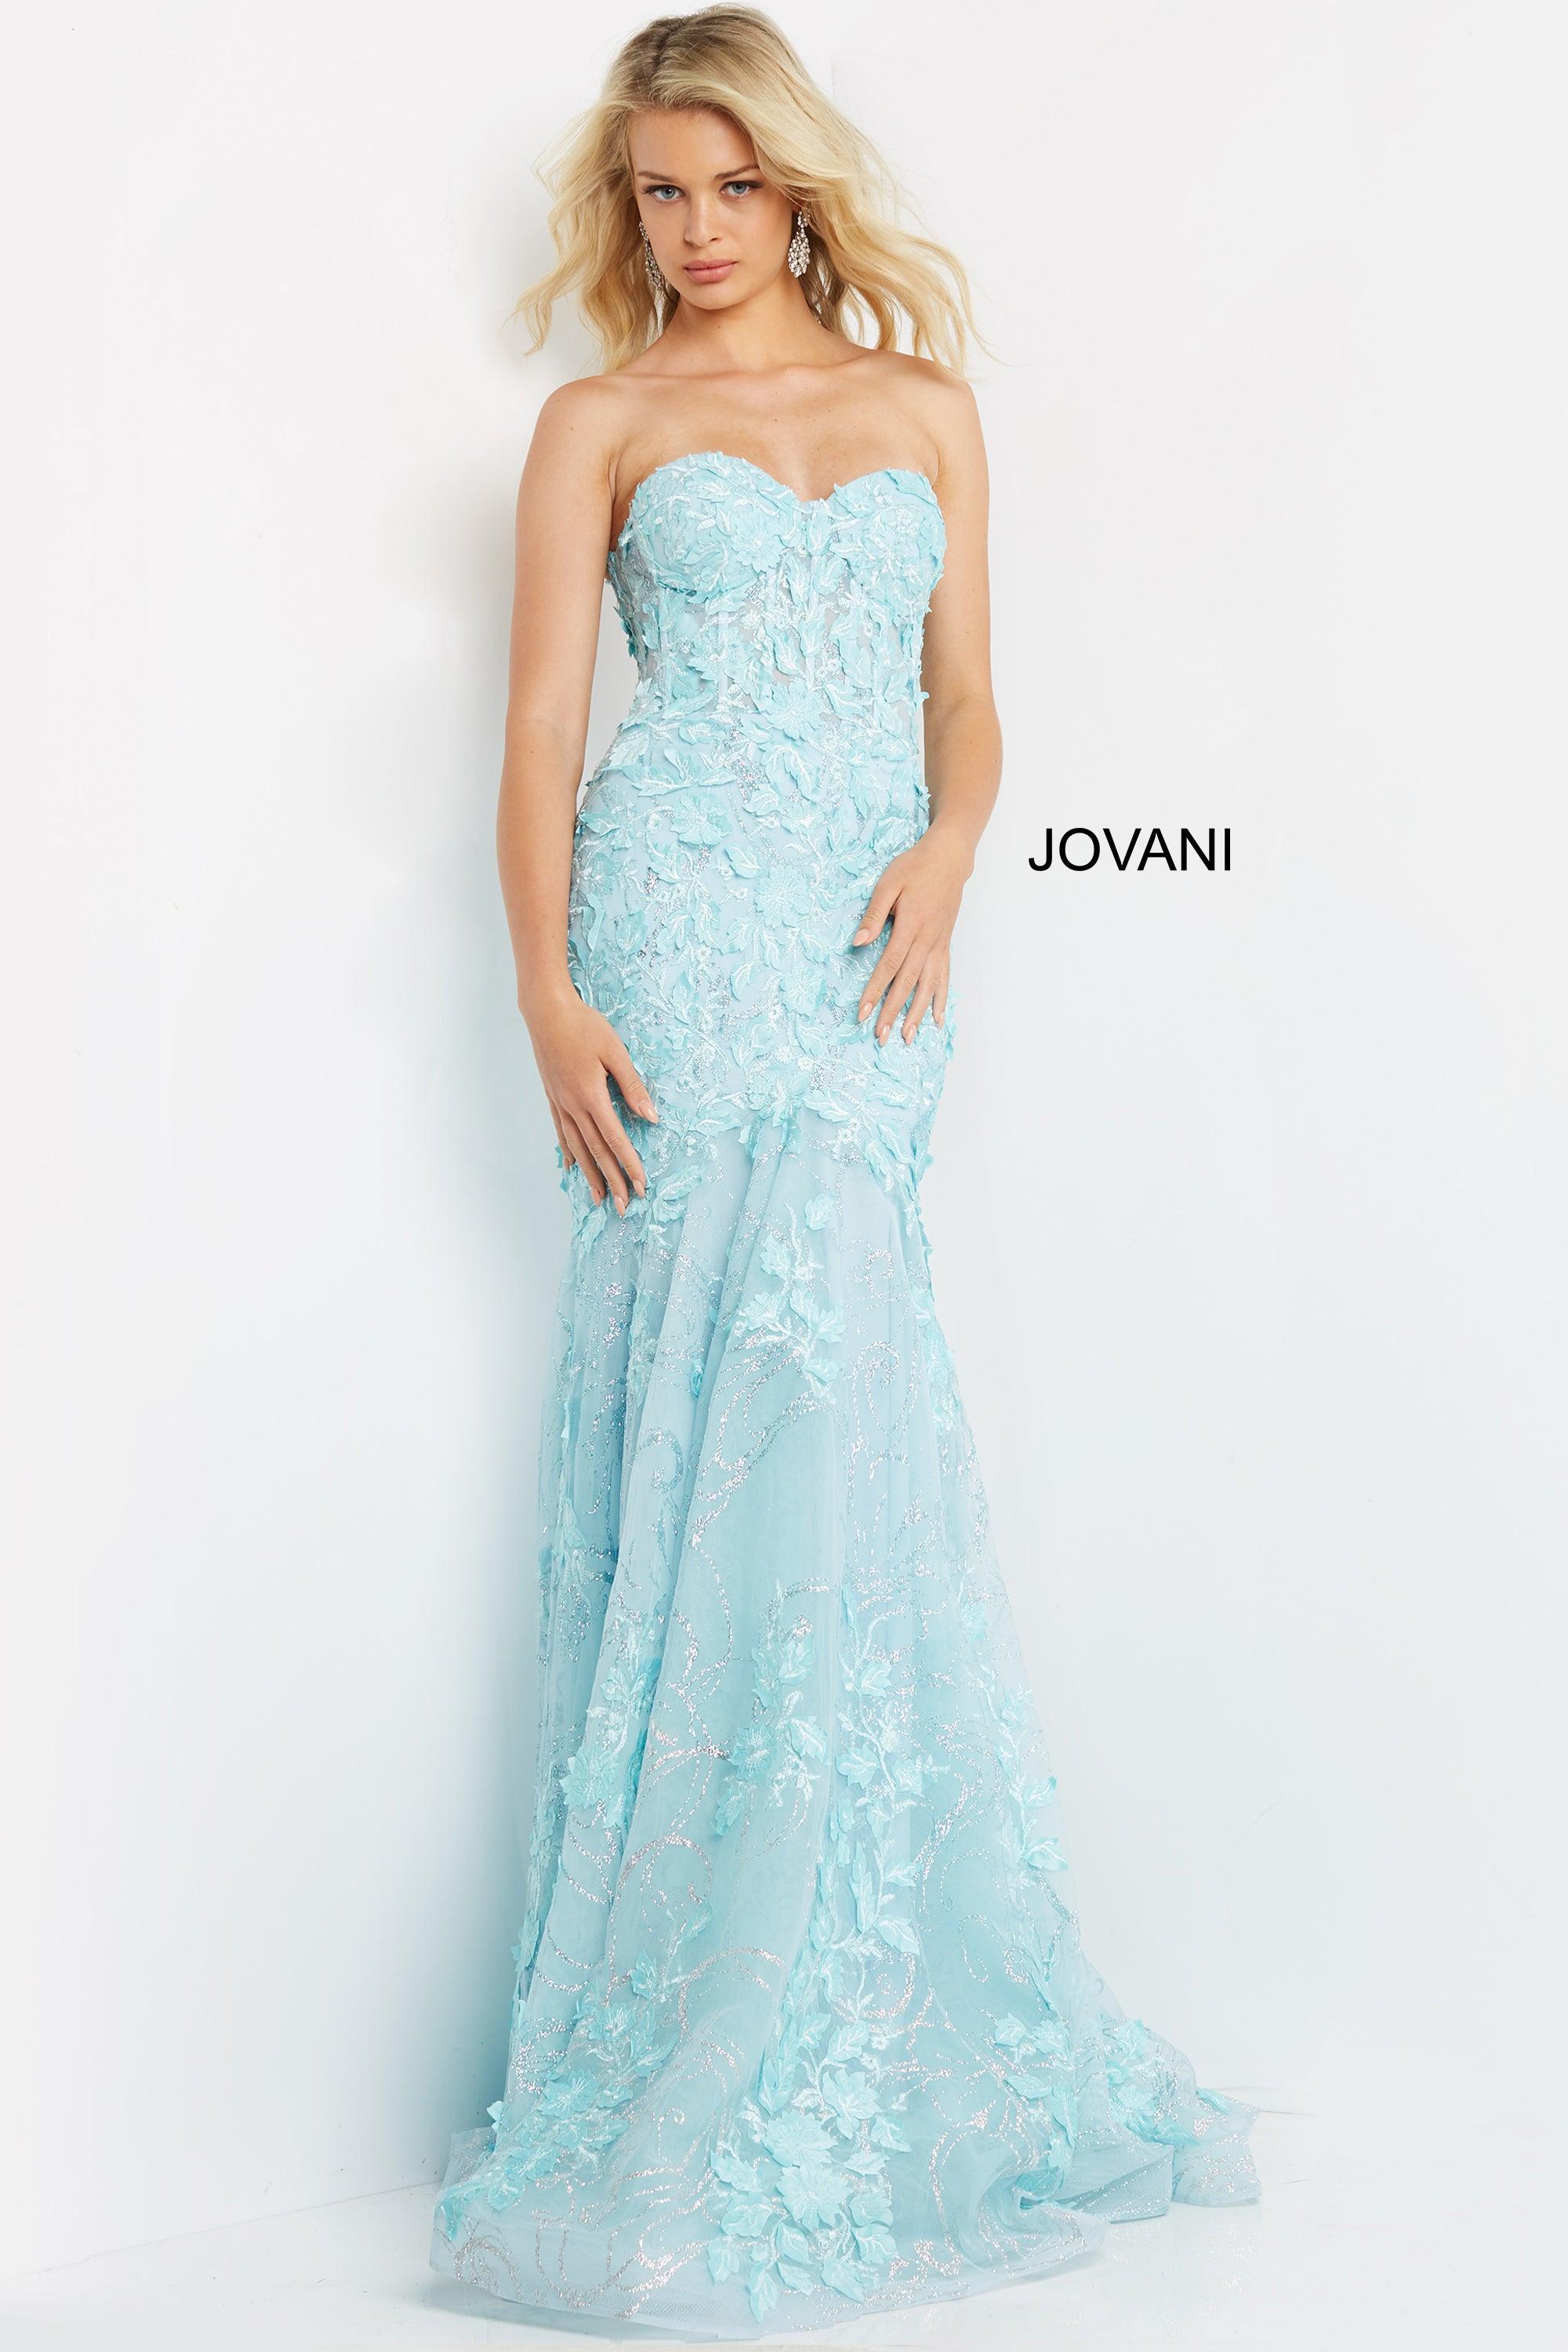 Jovani Strapless Sexy Long Prom Dress 07935 - The Dress Outlet